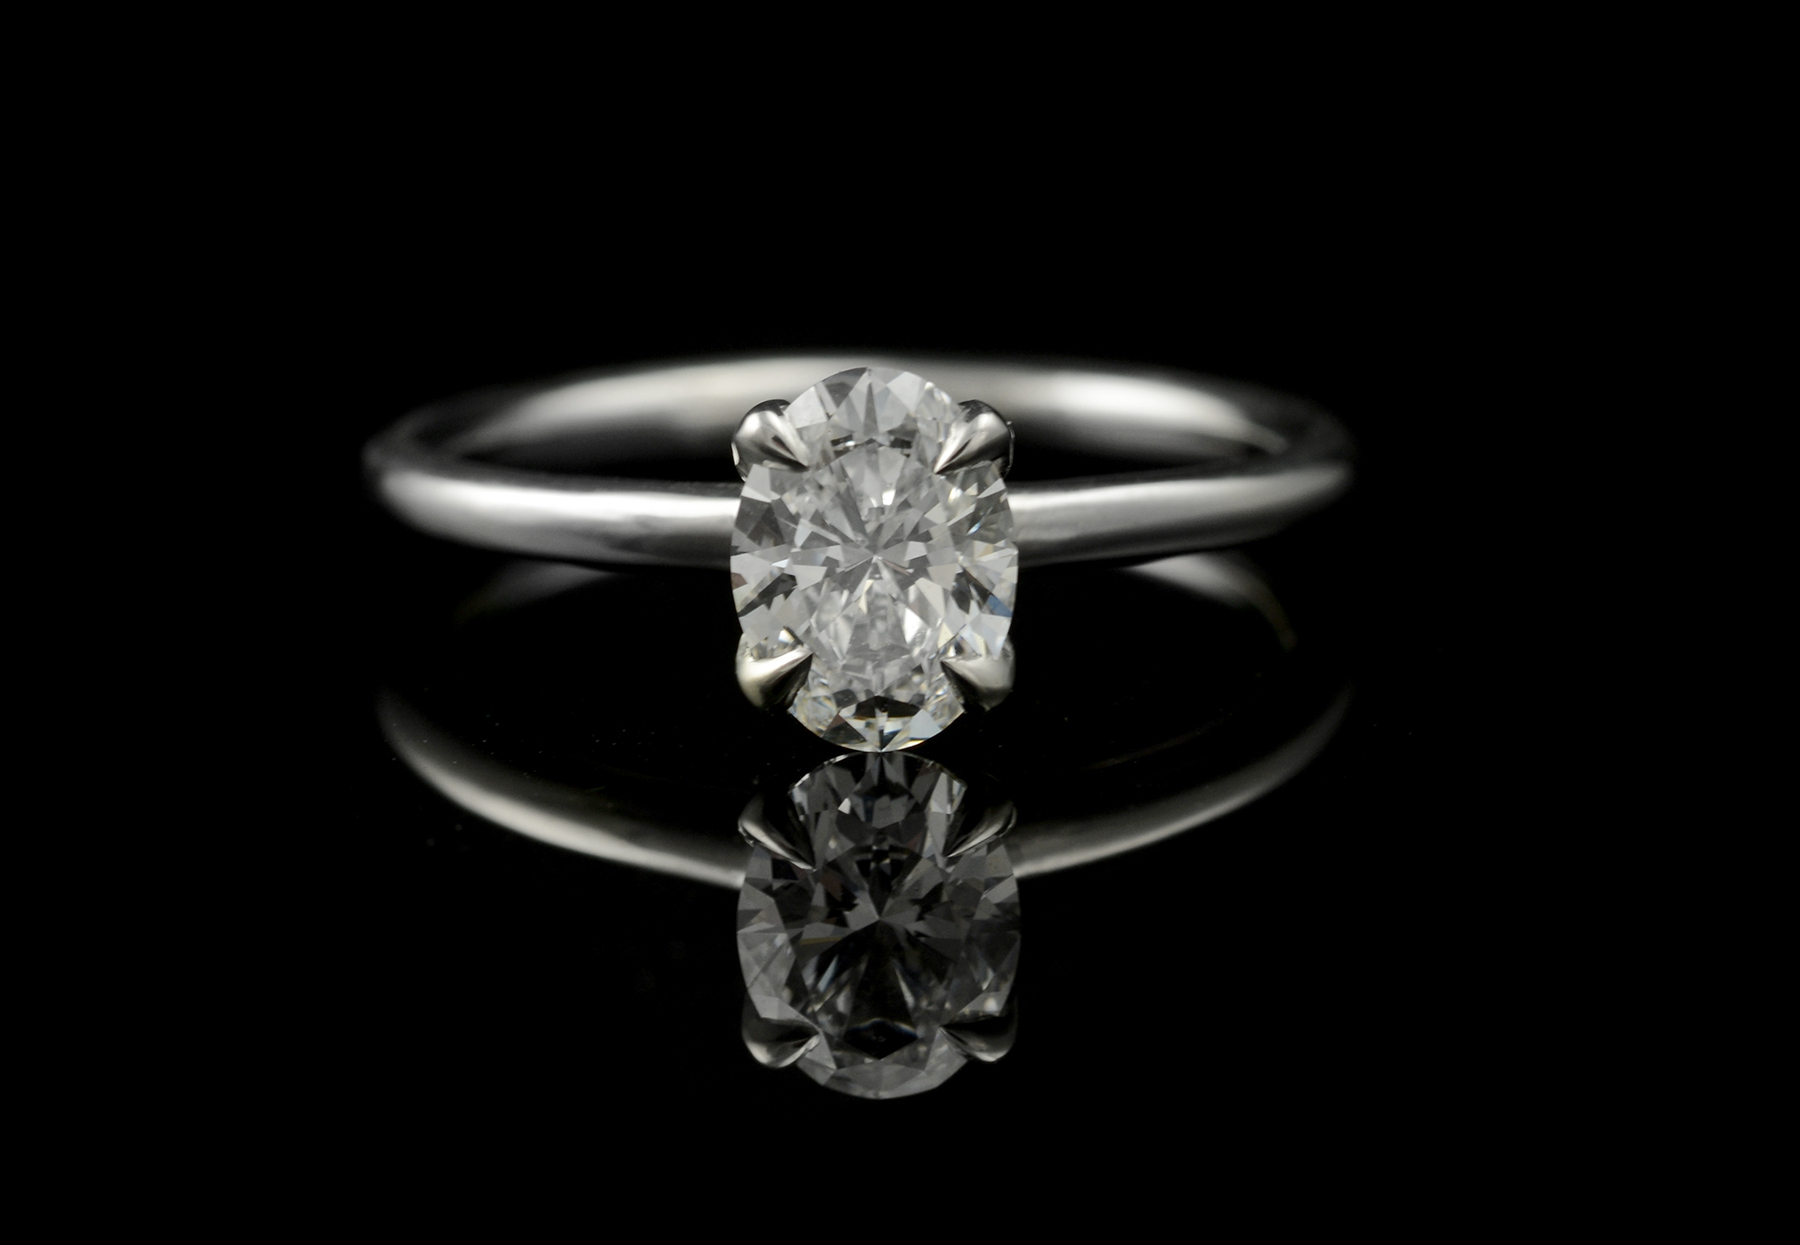 Platinum and oval white diamond 4-claw engagement ring